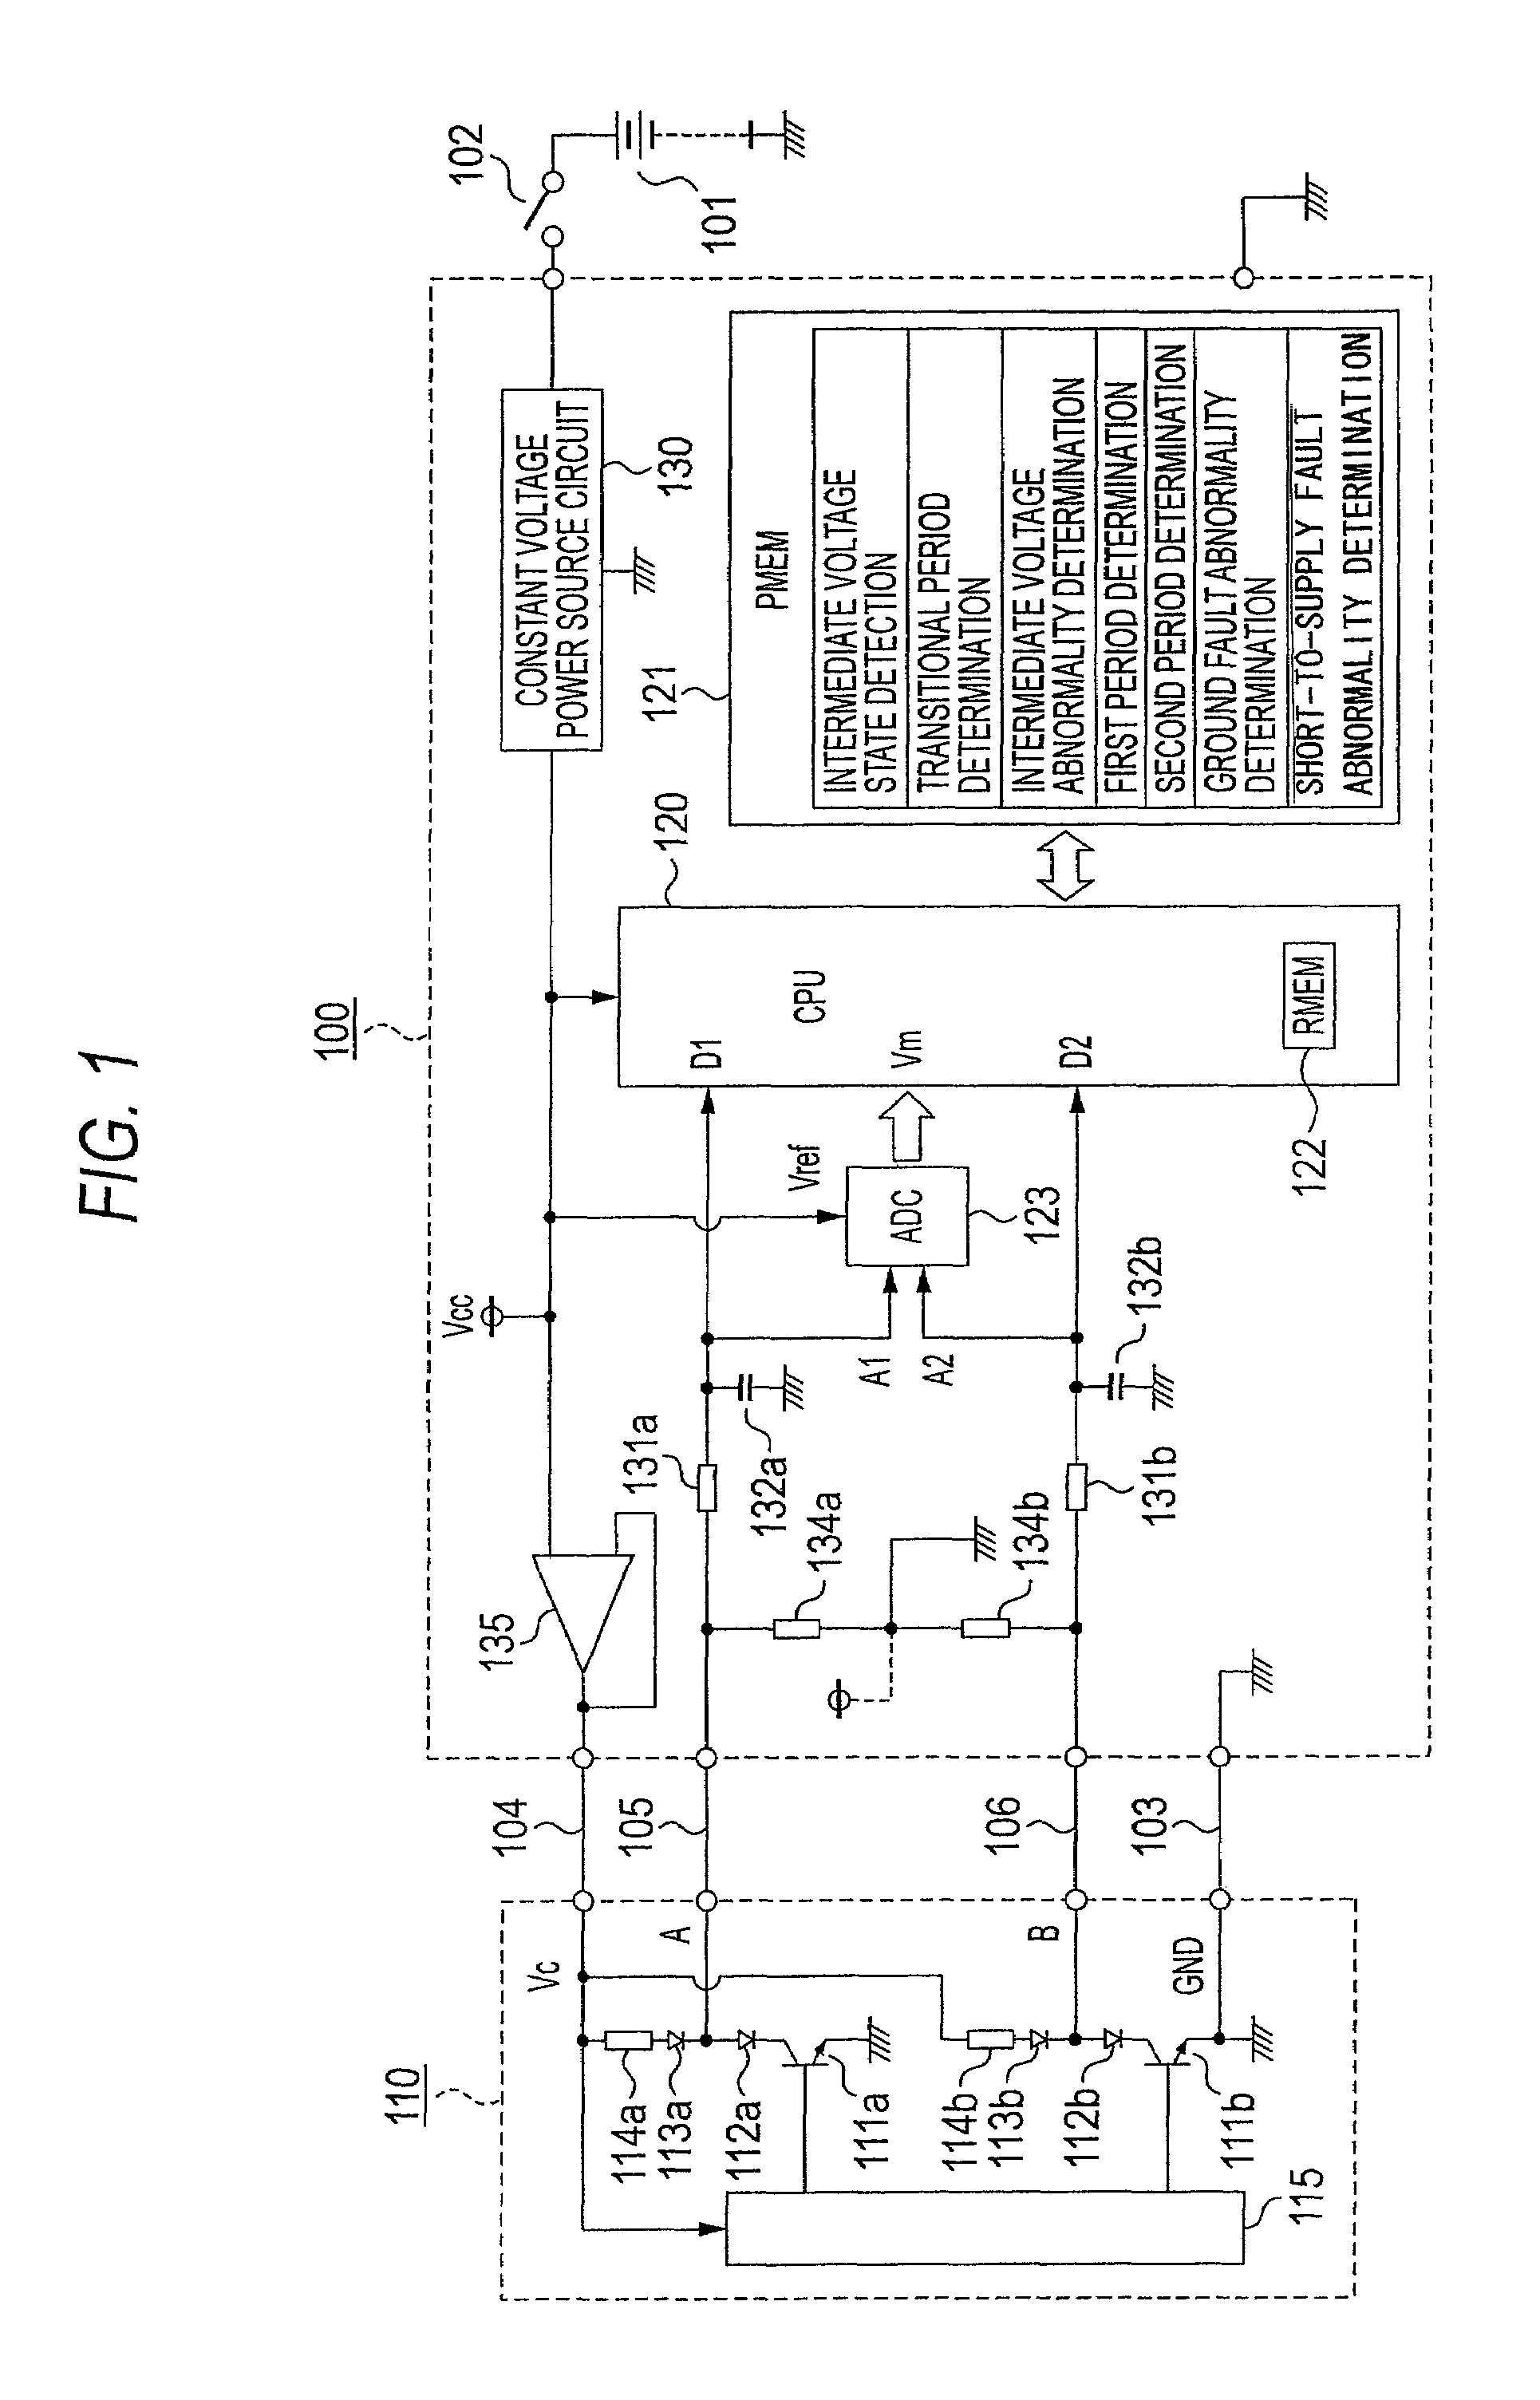 Wire abnormality detecting device